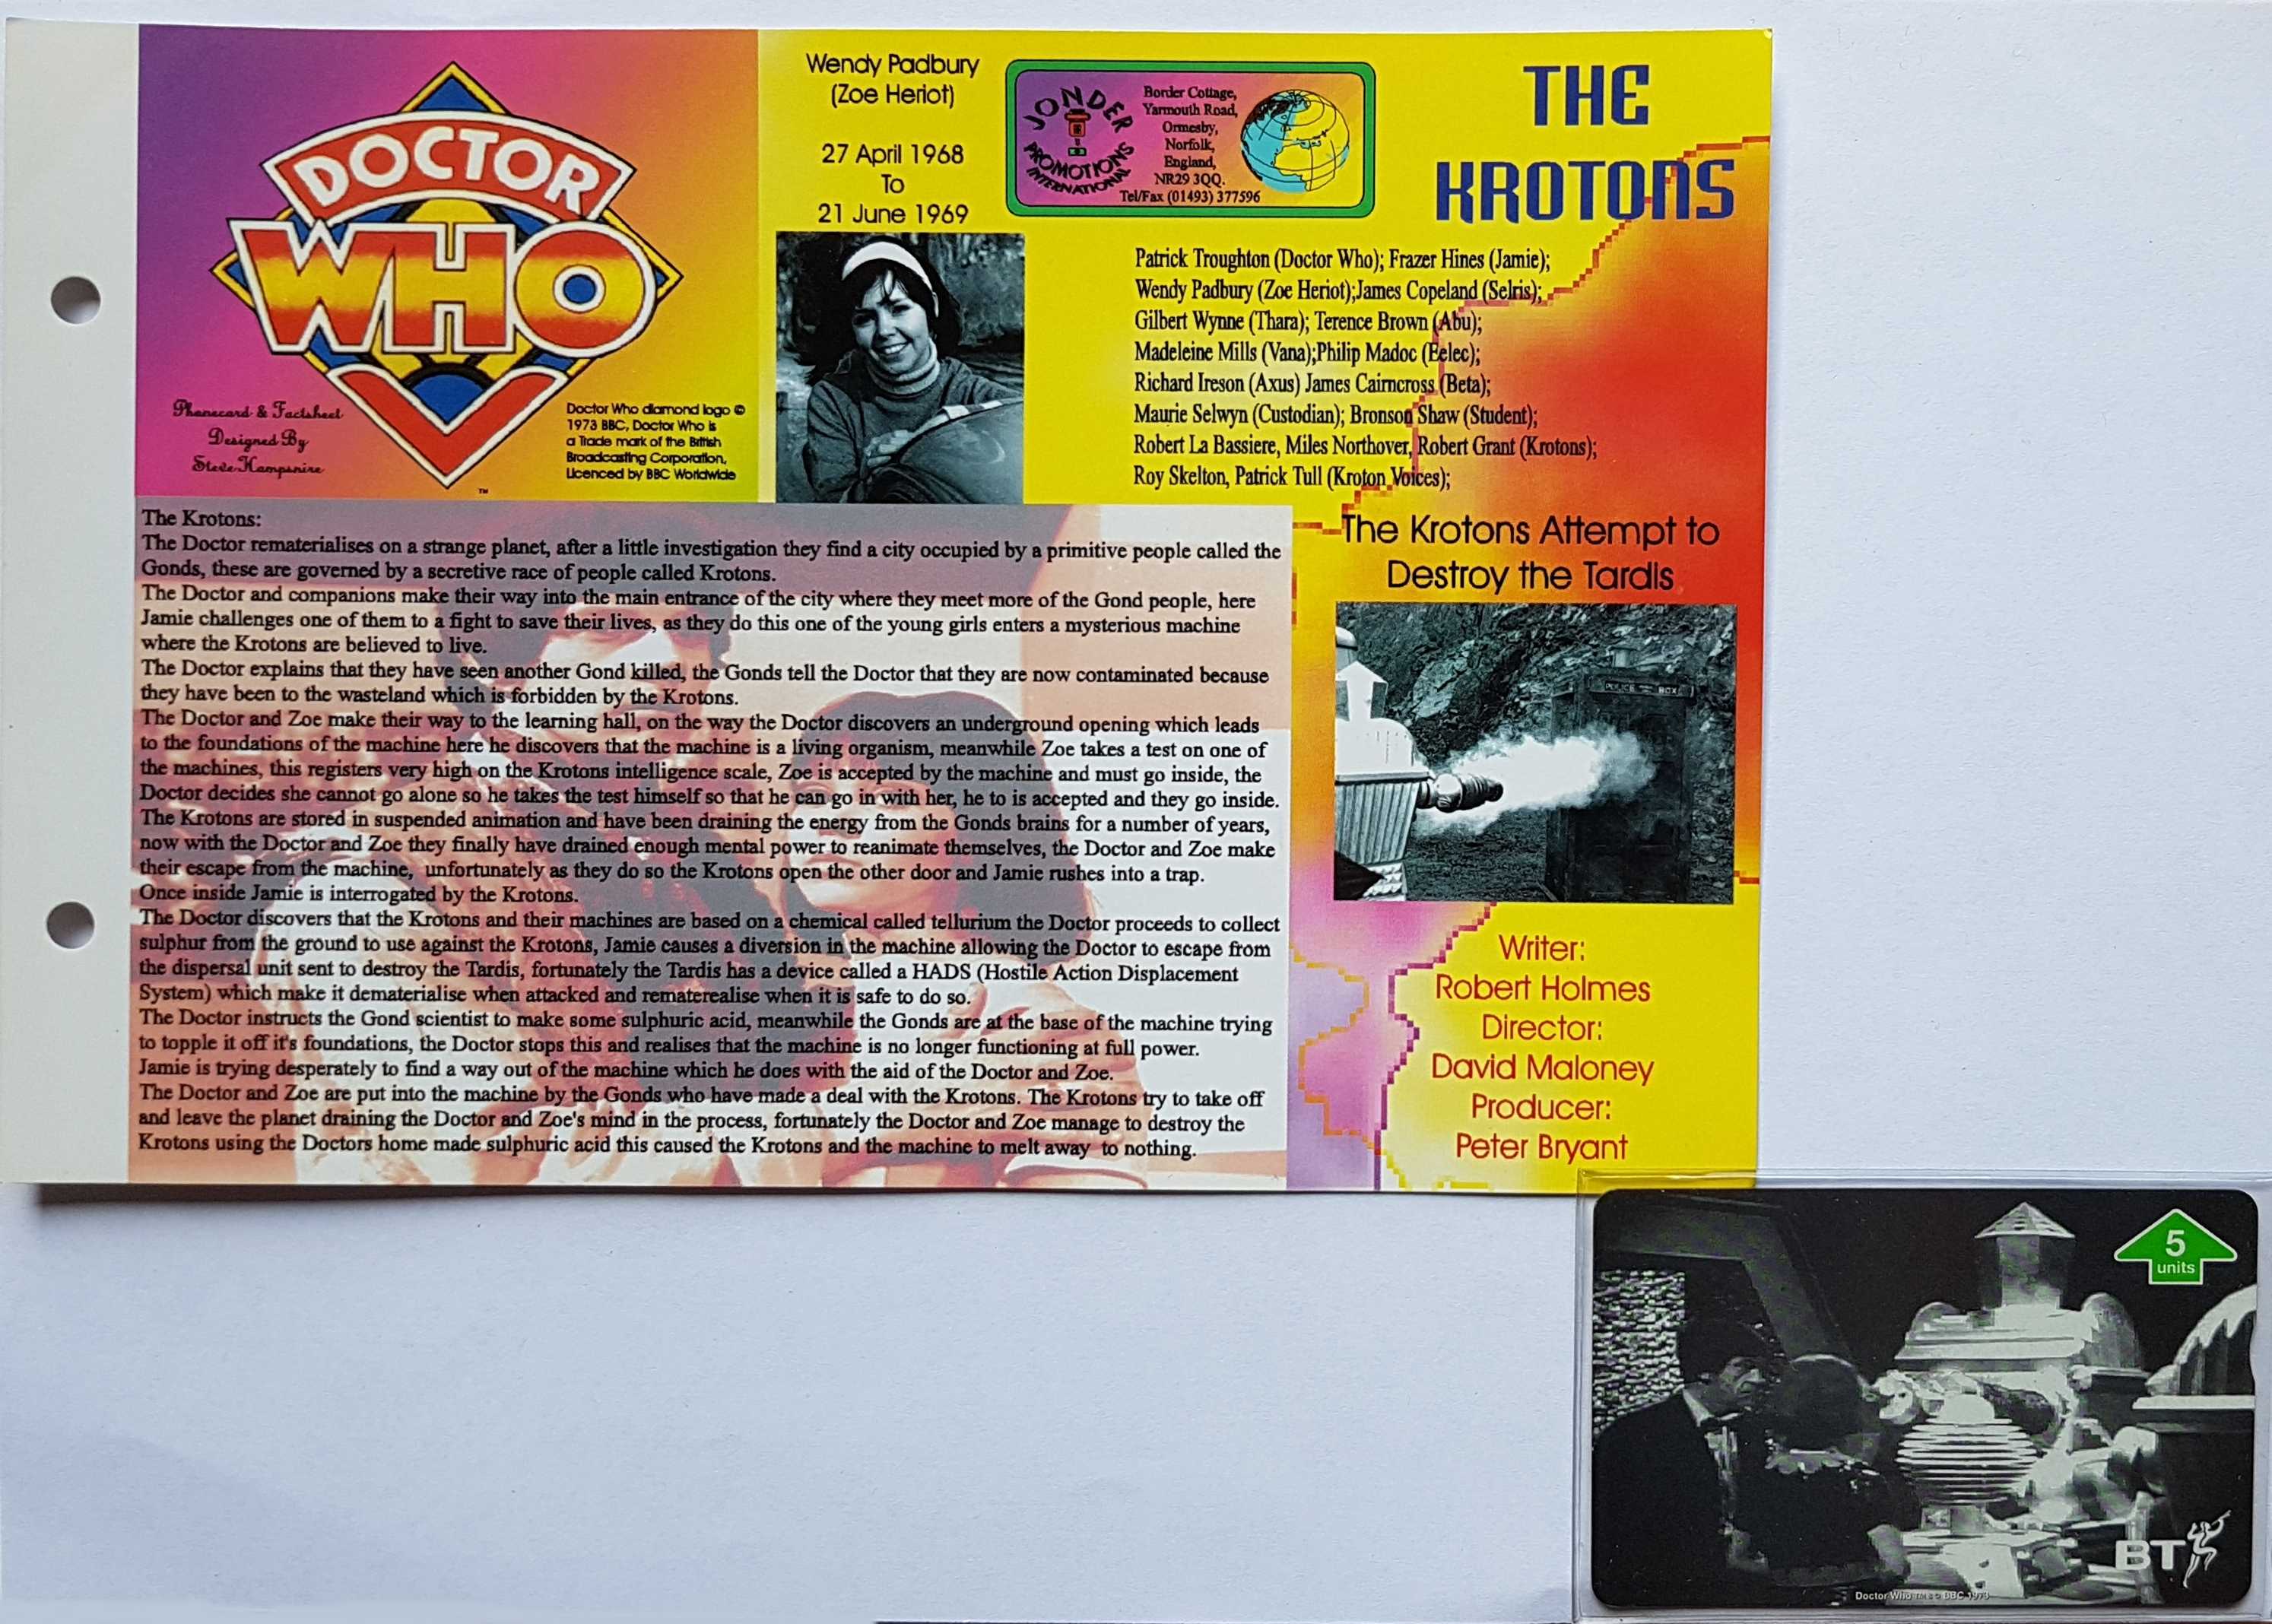 Picture of PC-BTG585 Doctor Who - The Krotons - Phone card by artist  from the BBC anything_else - Records and Tapes library